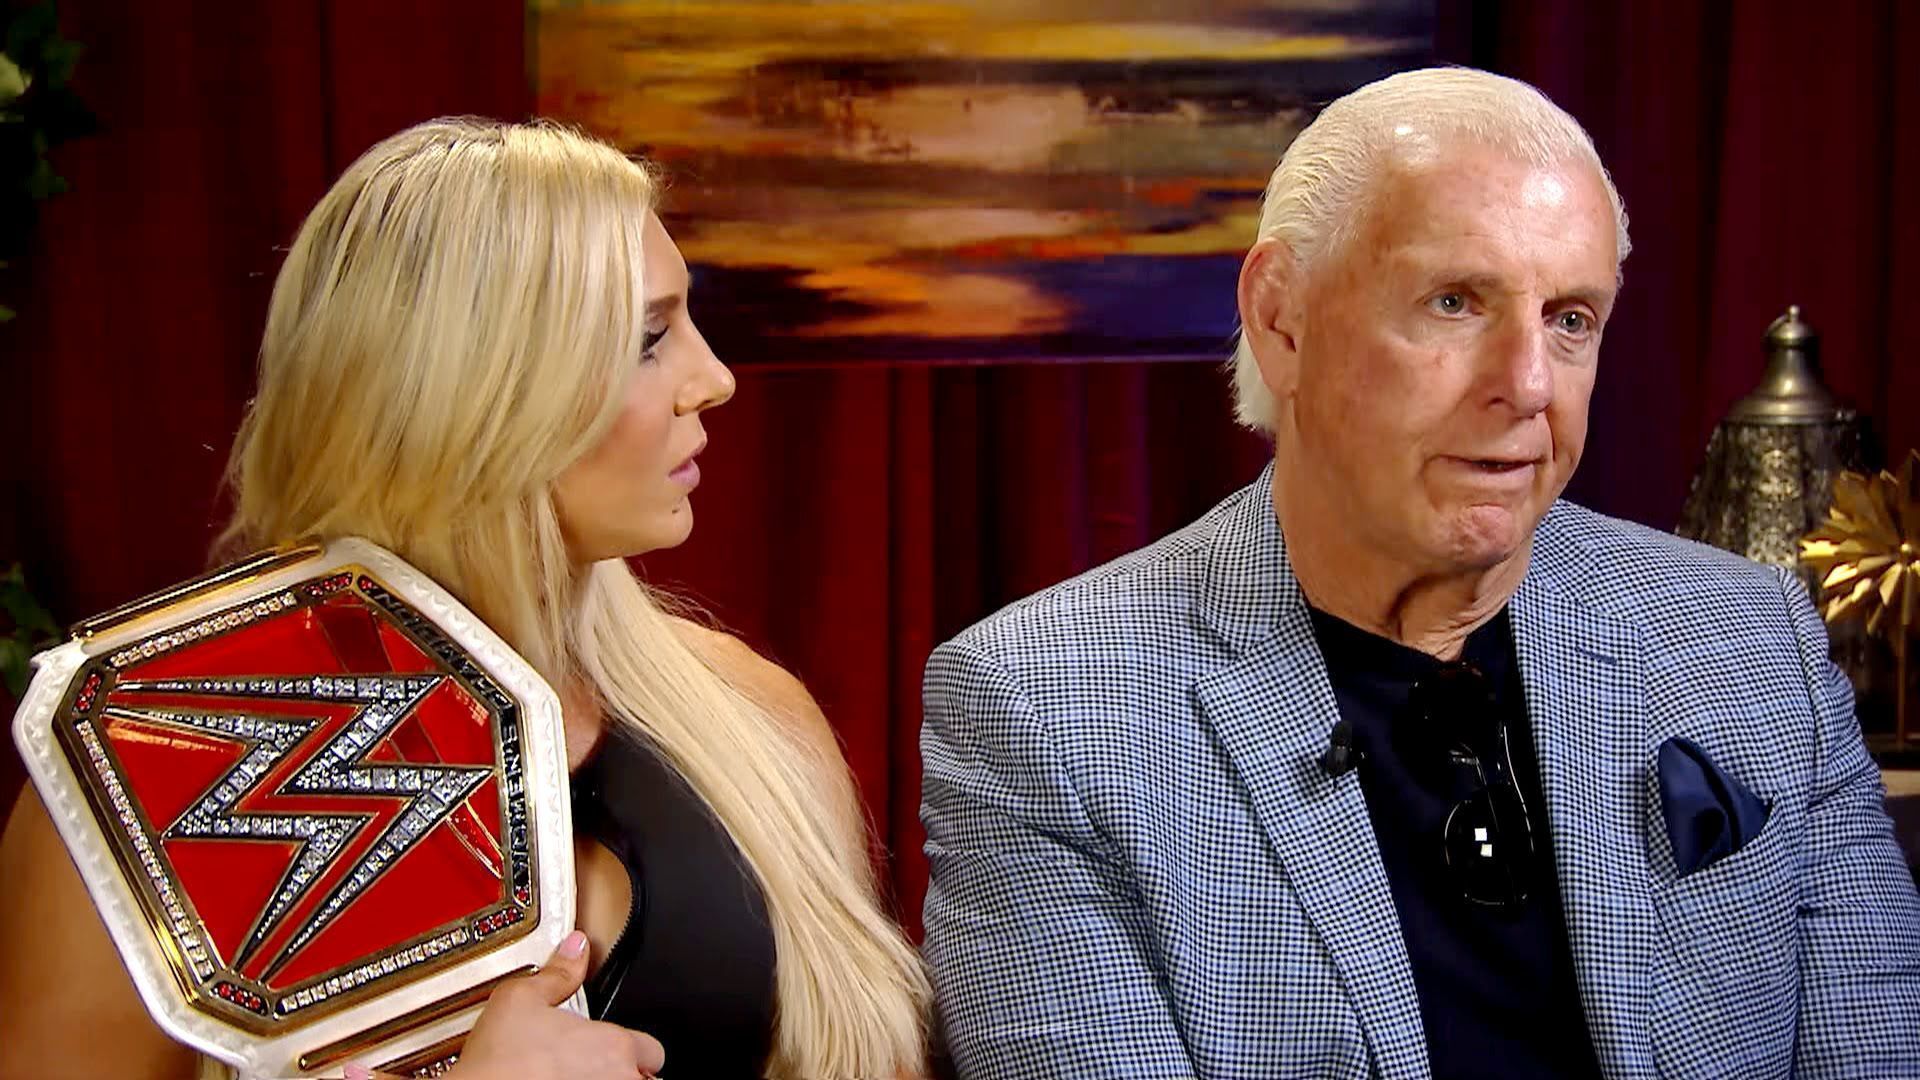 Charlotte Flair discusses being compared to her father